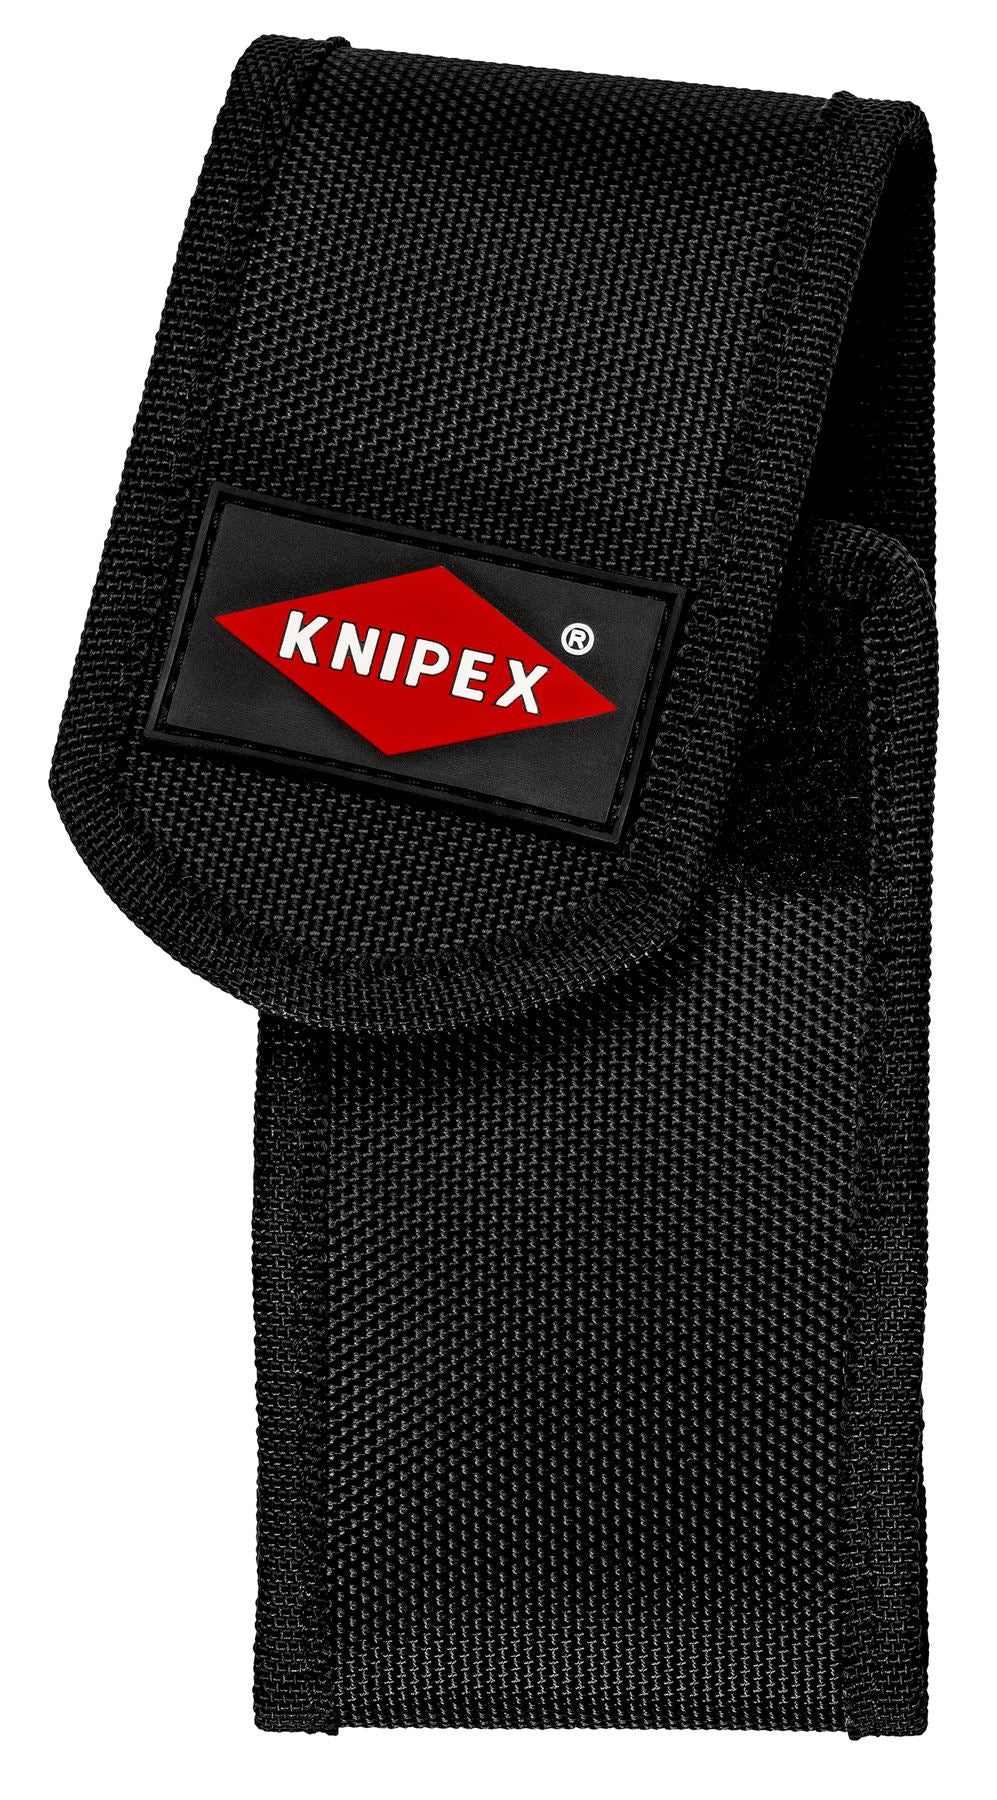 KNIPEX Belt Pouch Empty Suitable for 2 Pliers up to 150mm Long 00 19 72 LE